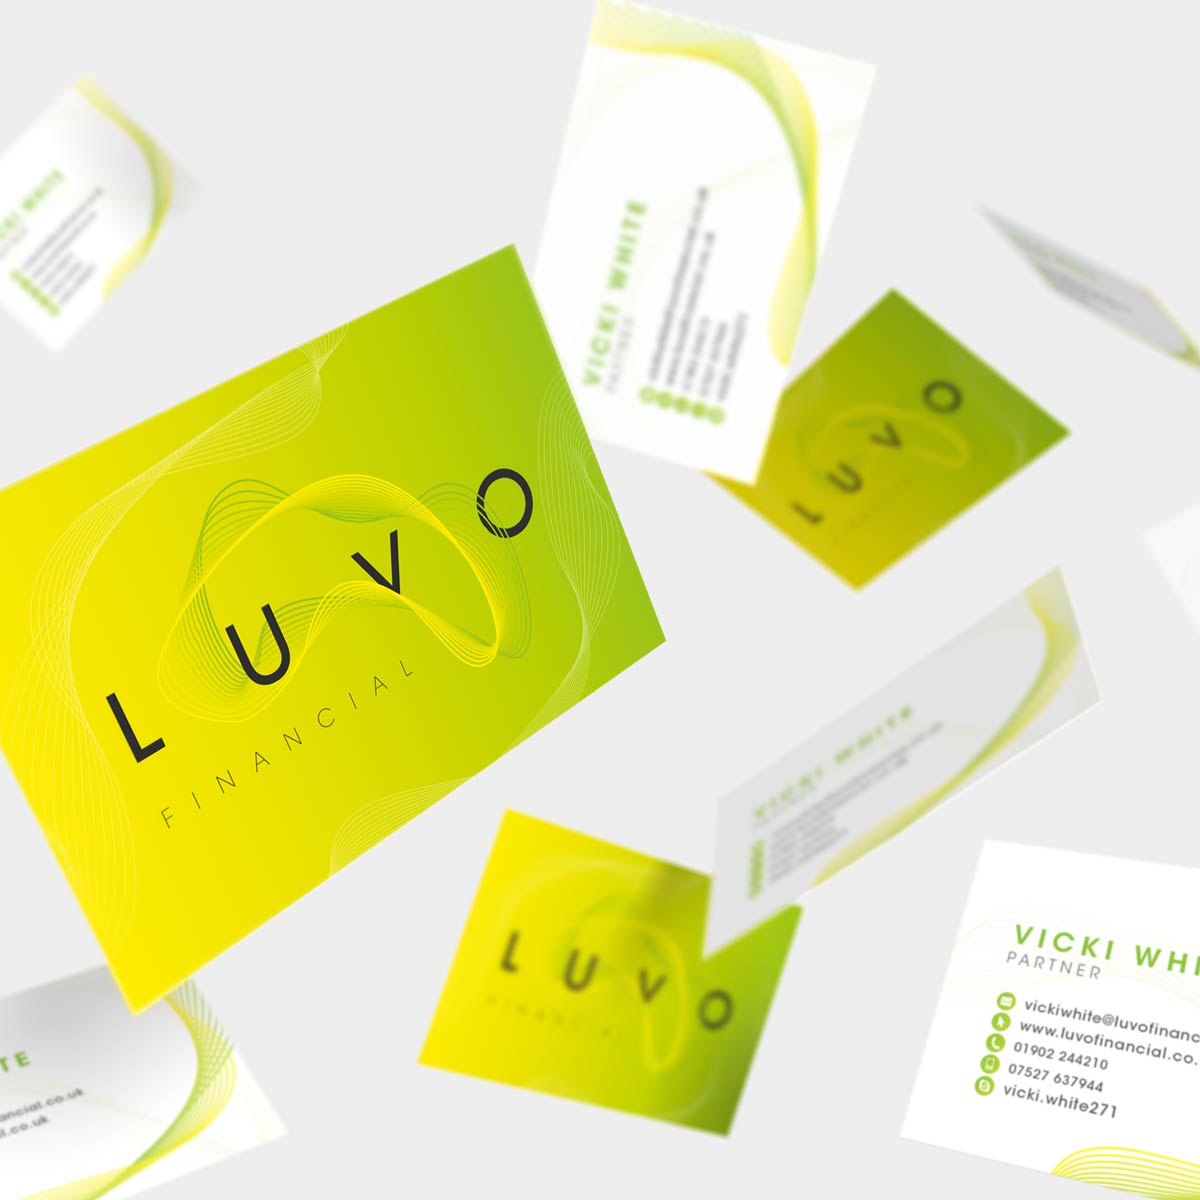 Luvo financial business card design 